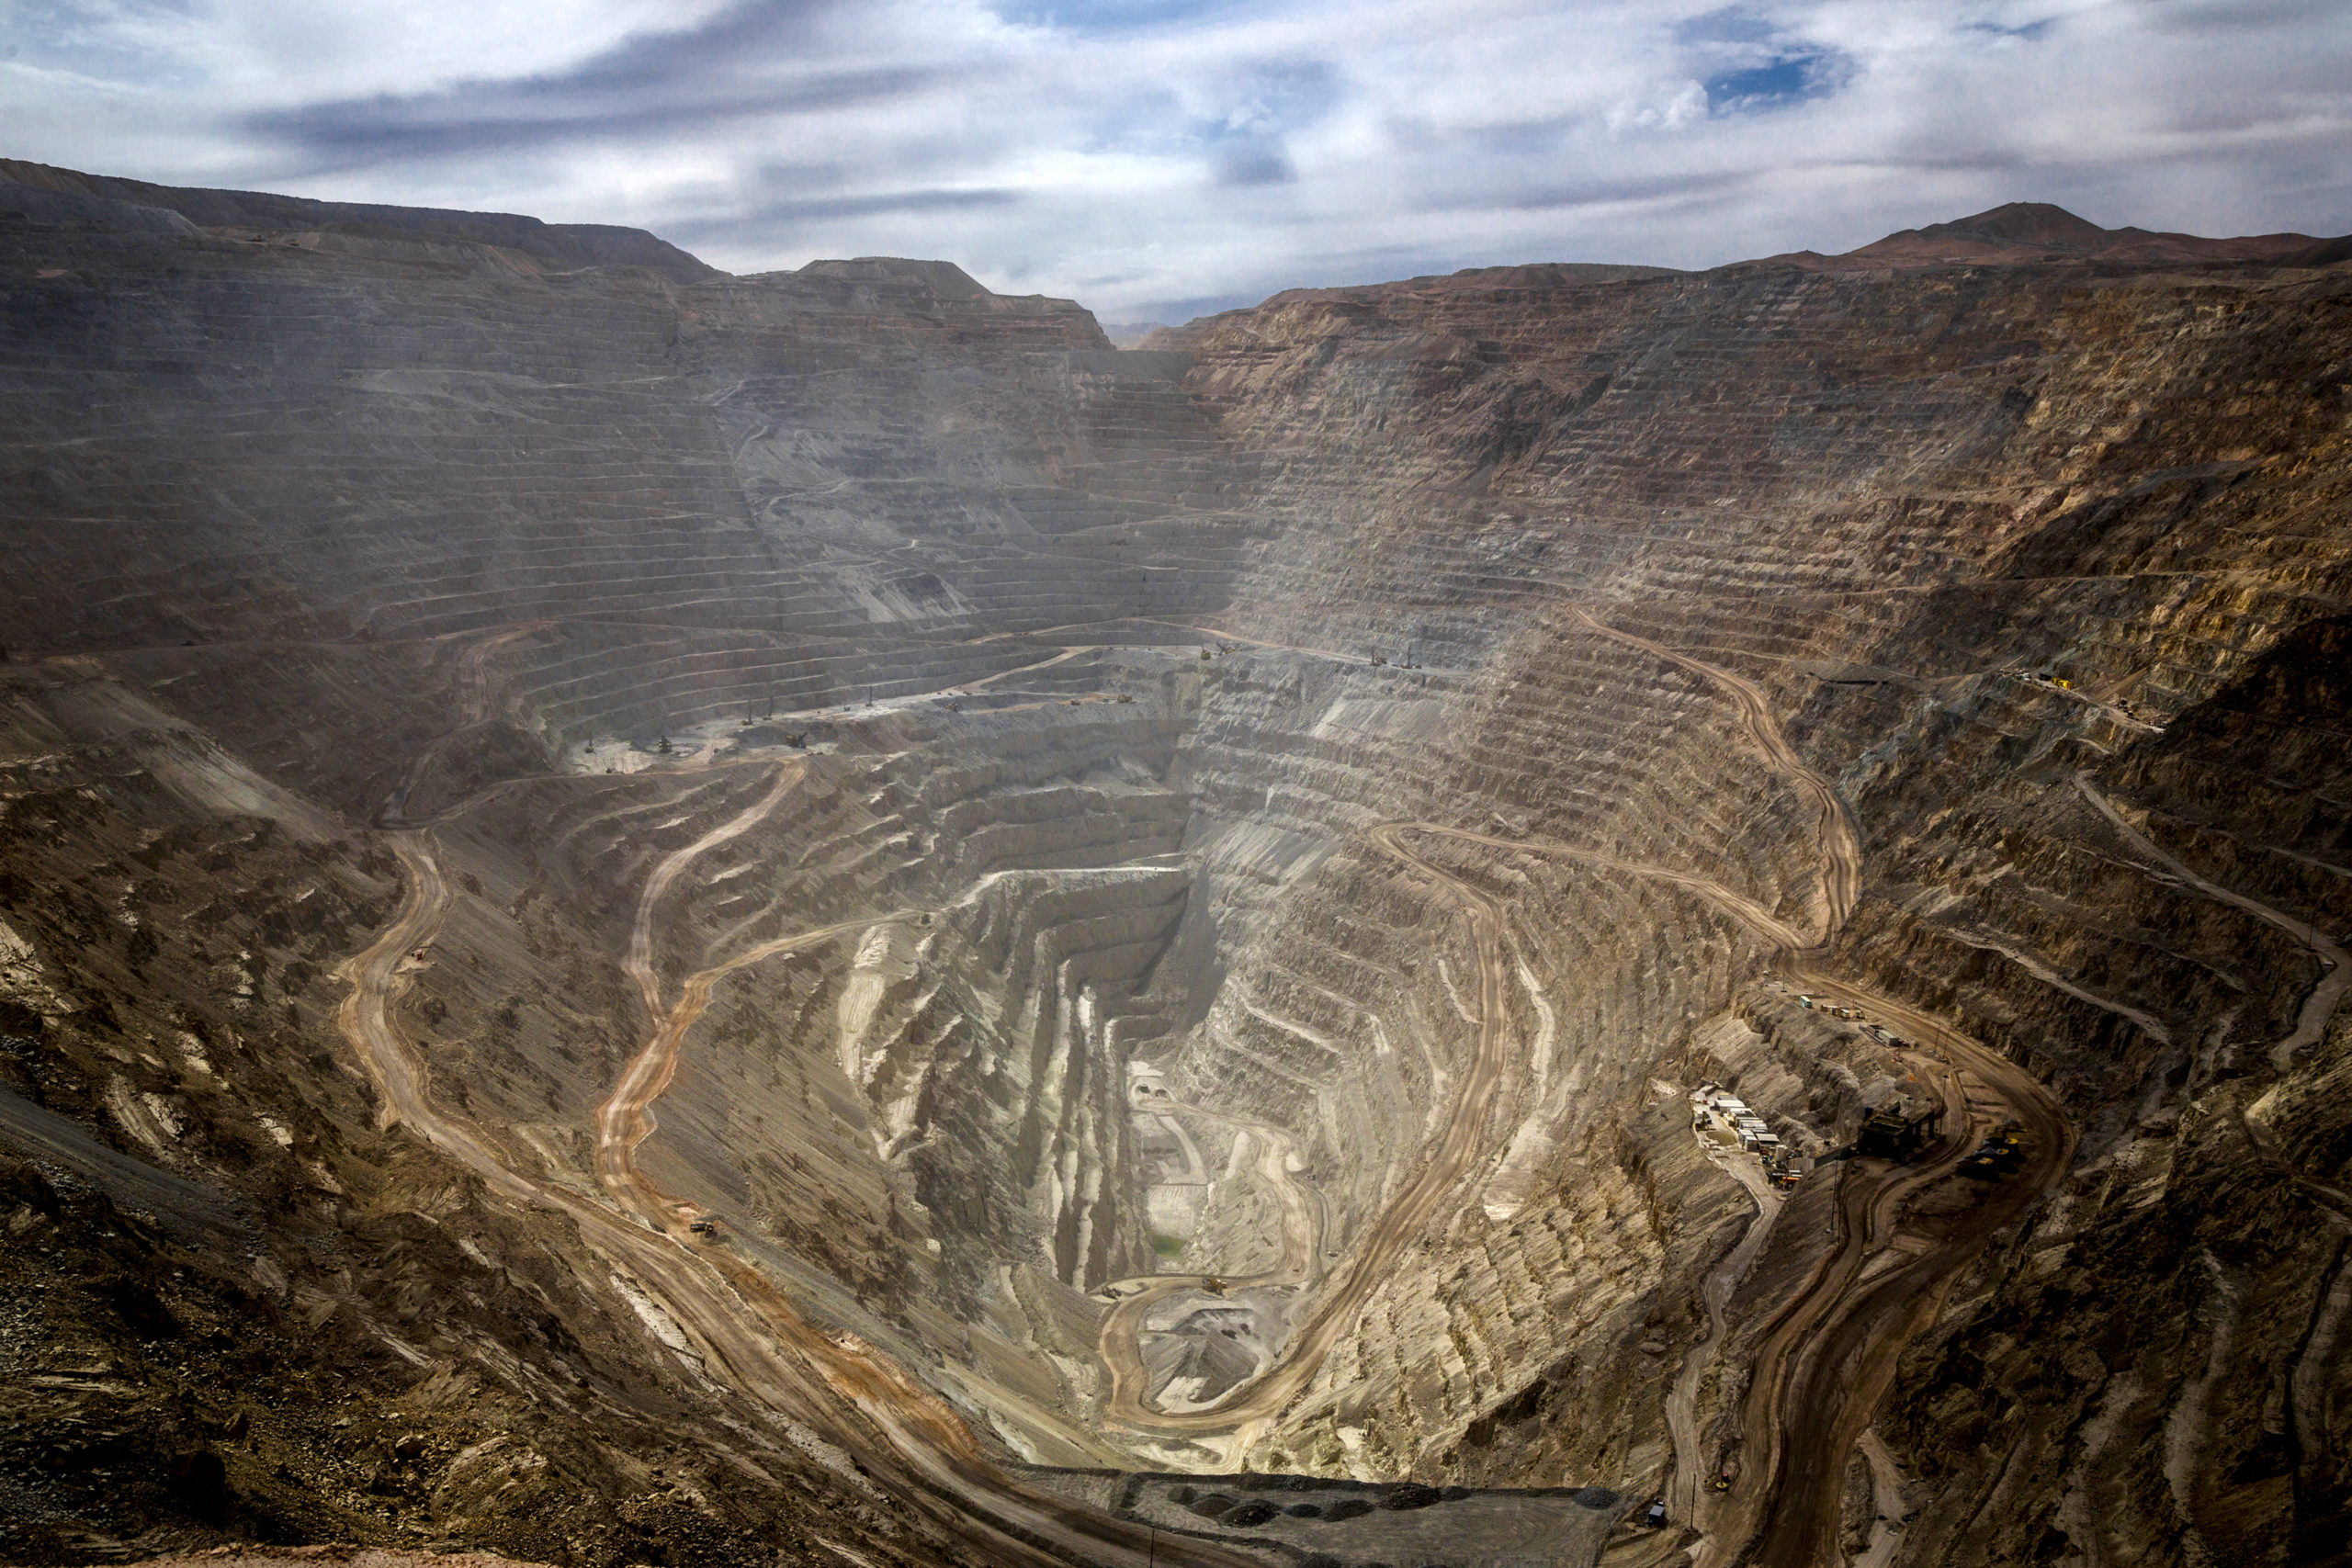 In the wake of the Covid-19 outbreak, telework has proved its worth even in remote places like the Chuquicamata copper mine near the city of Calama, in northern Chile. Nearly overnight, Codelco replaced many in-person meetings with digital ways of working together.